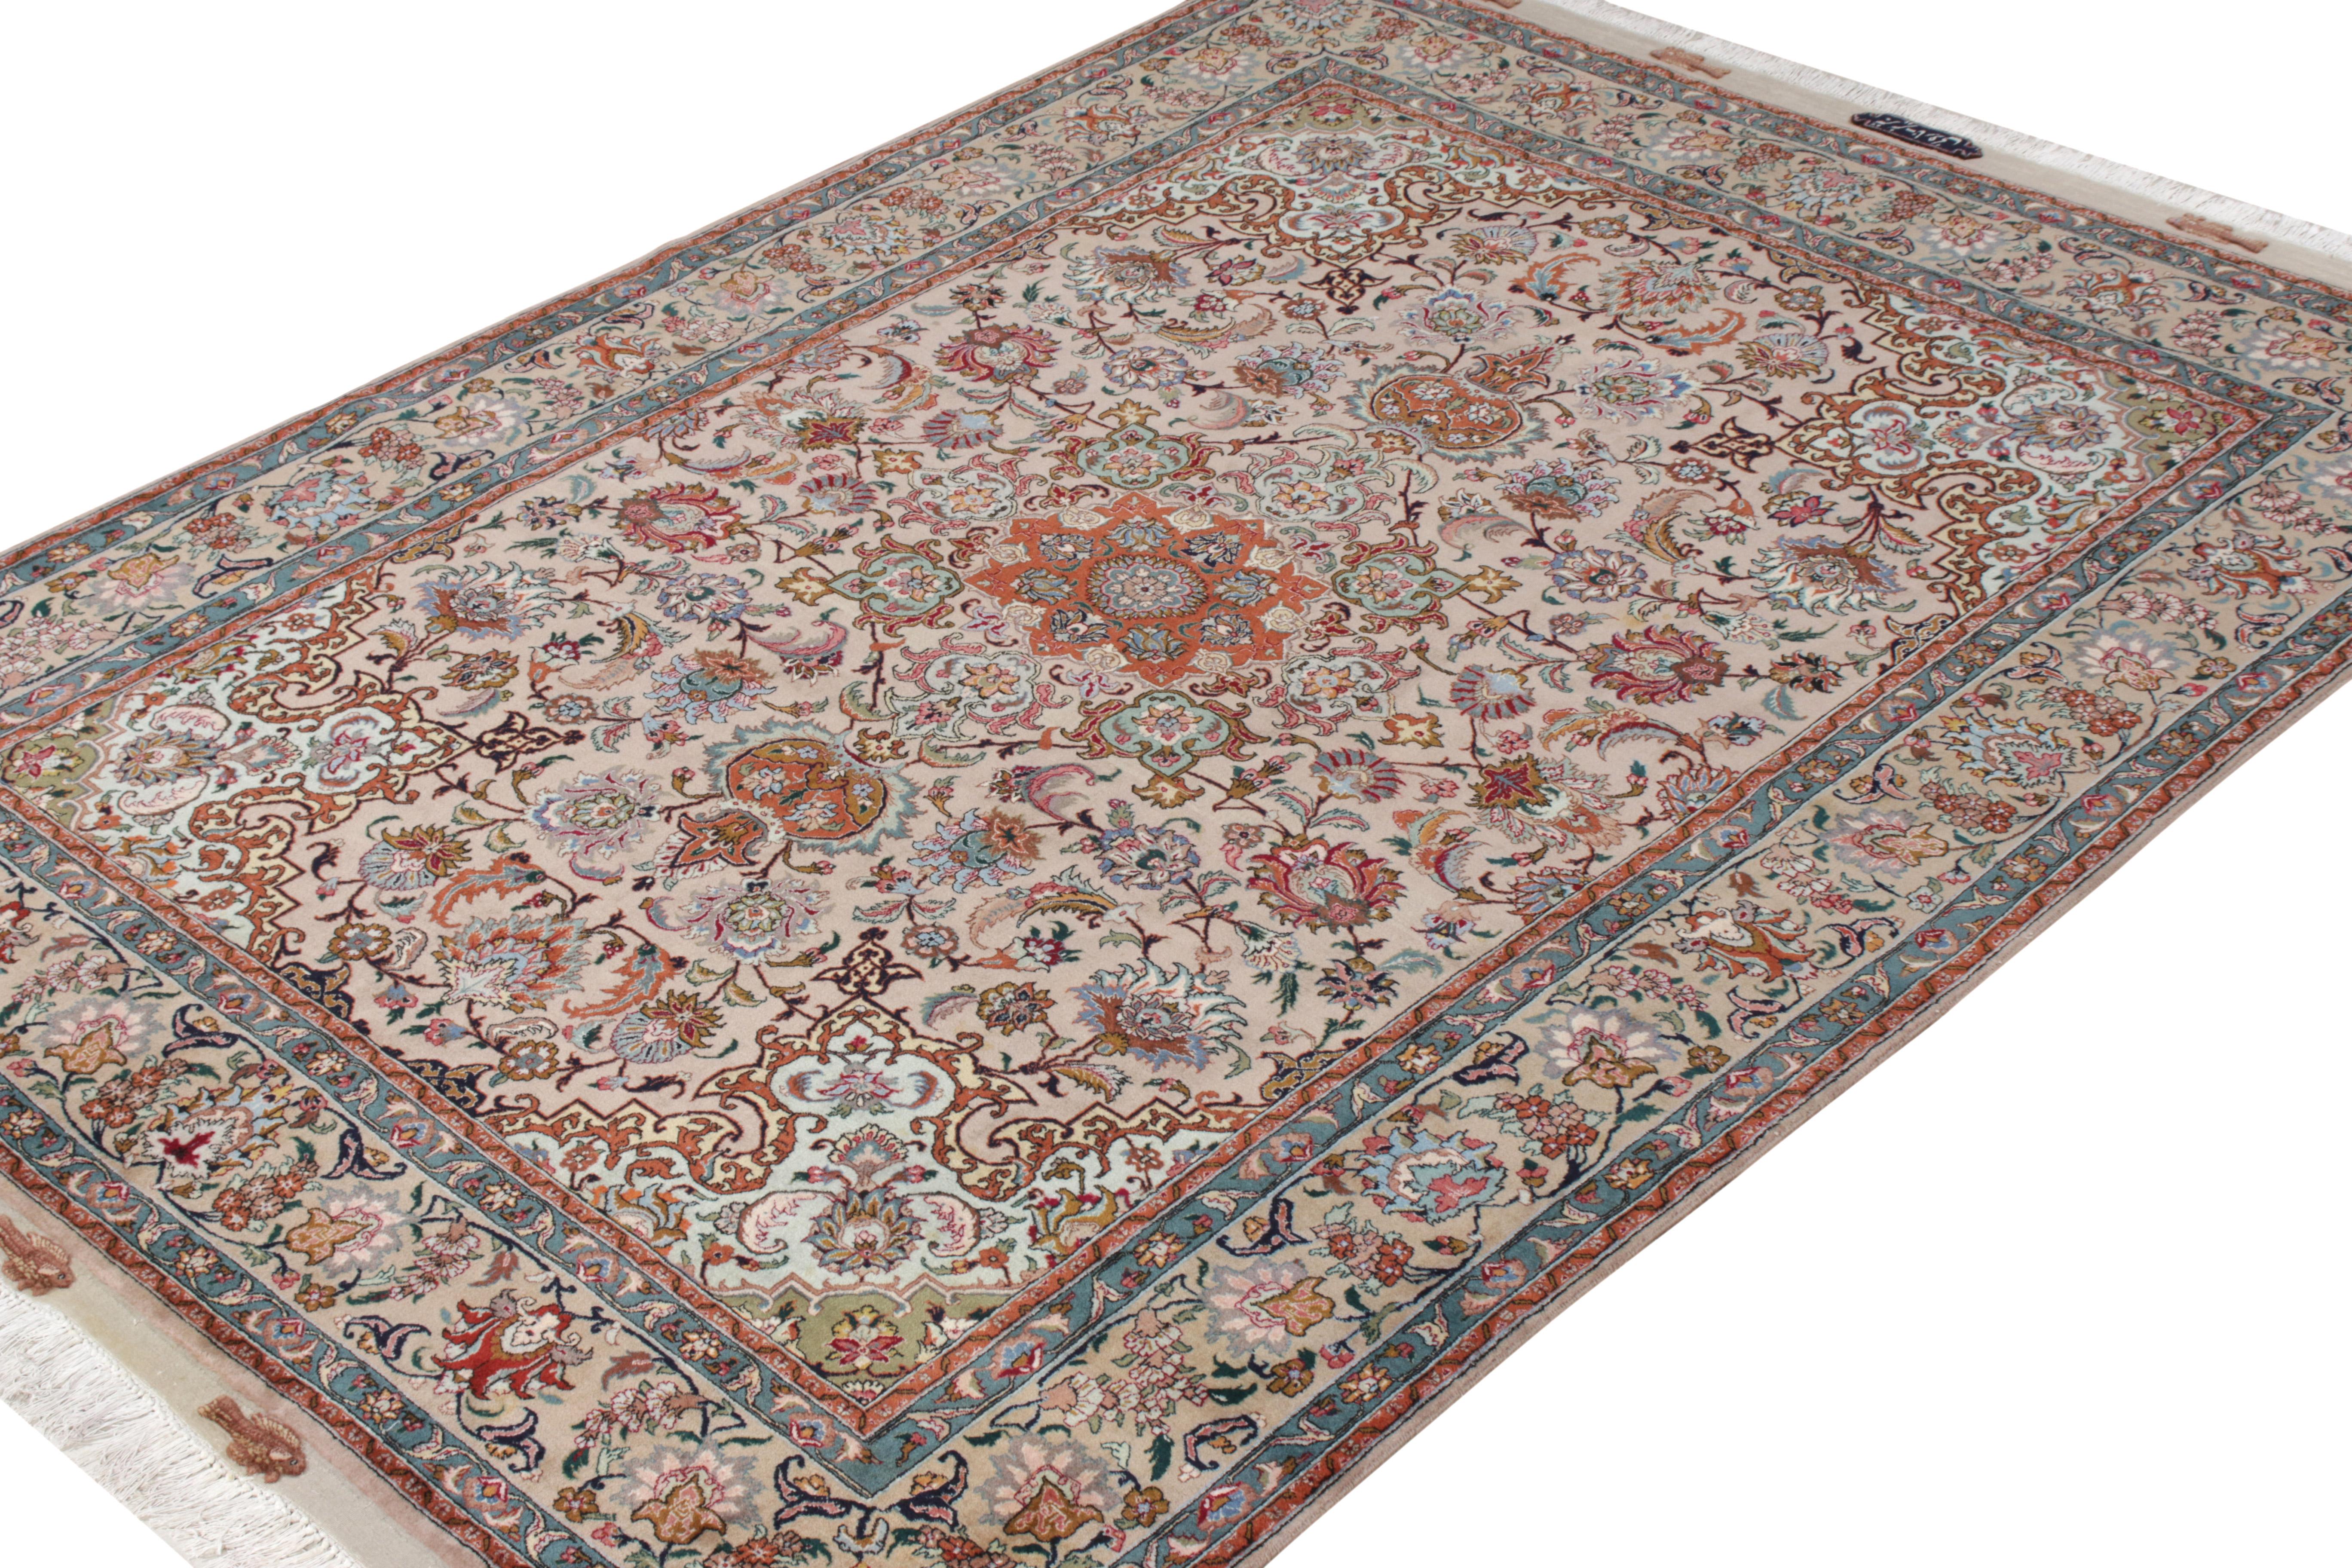 Persian Hand-Knotted Vintage Tabriz Rug in Pink, Red Floral Patterns by Rug & Kilim For Sale